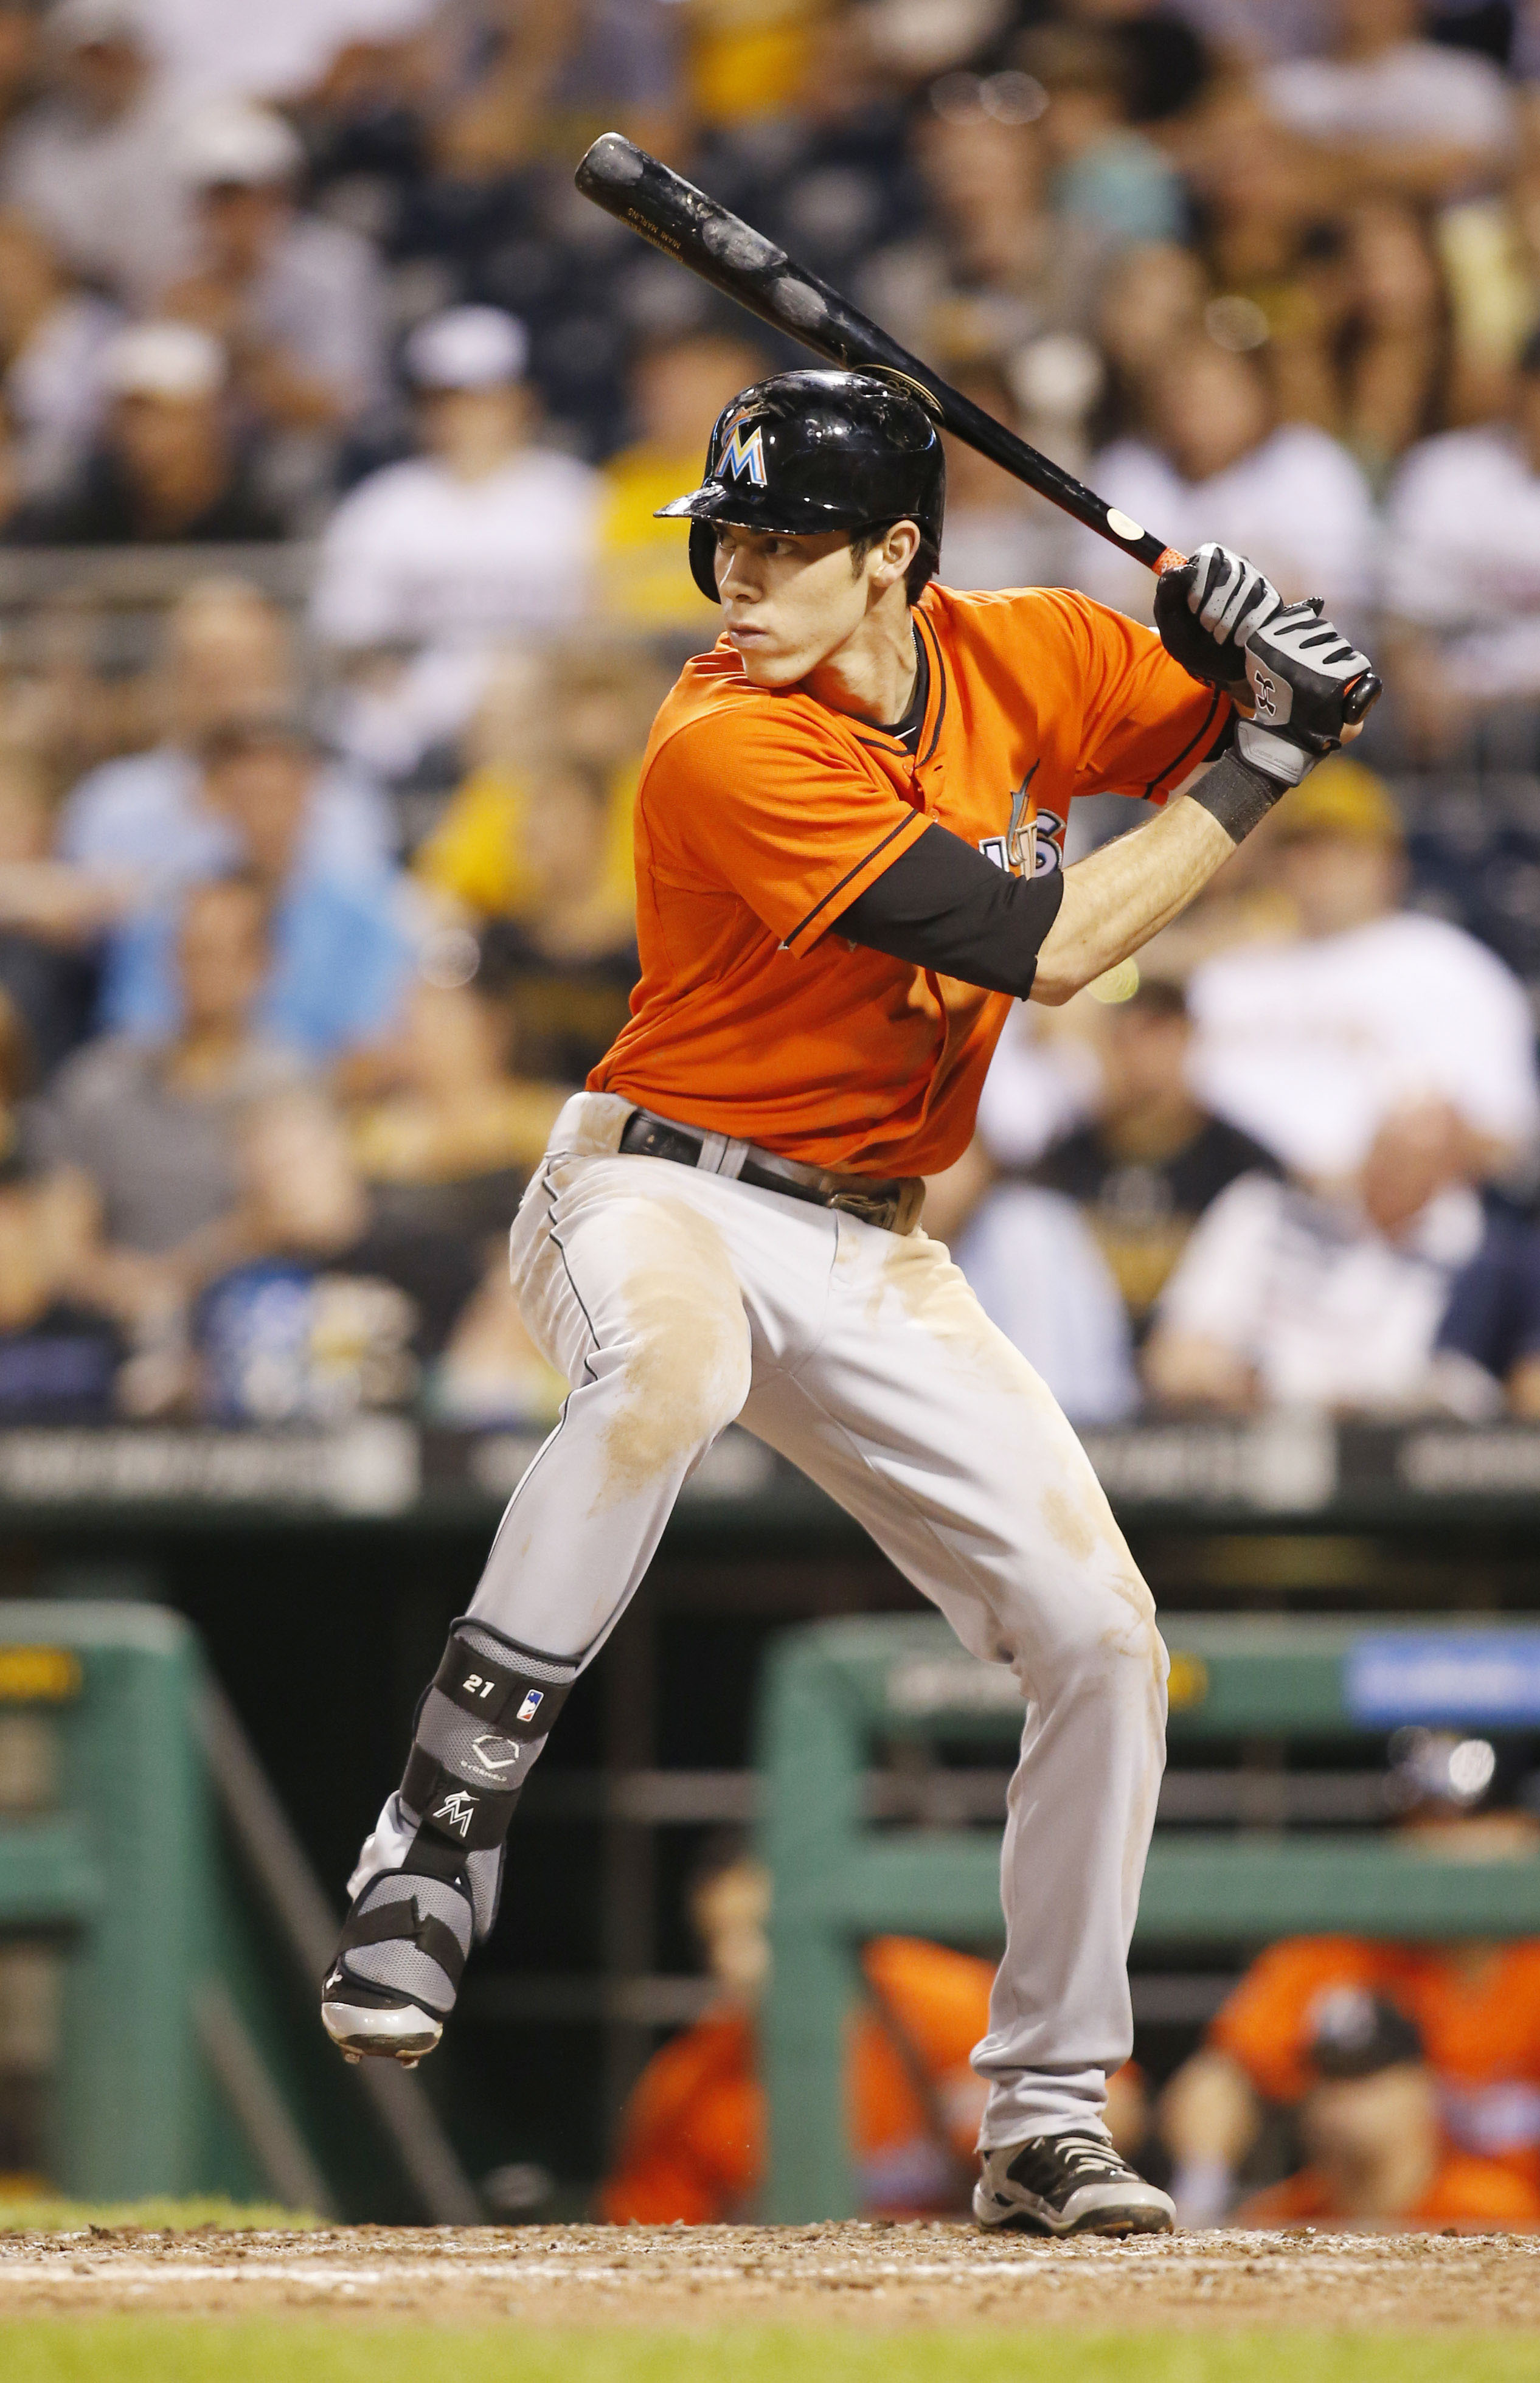 Marlins' Yelich not worried about another slow start